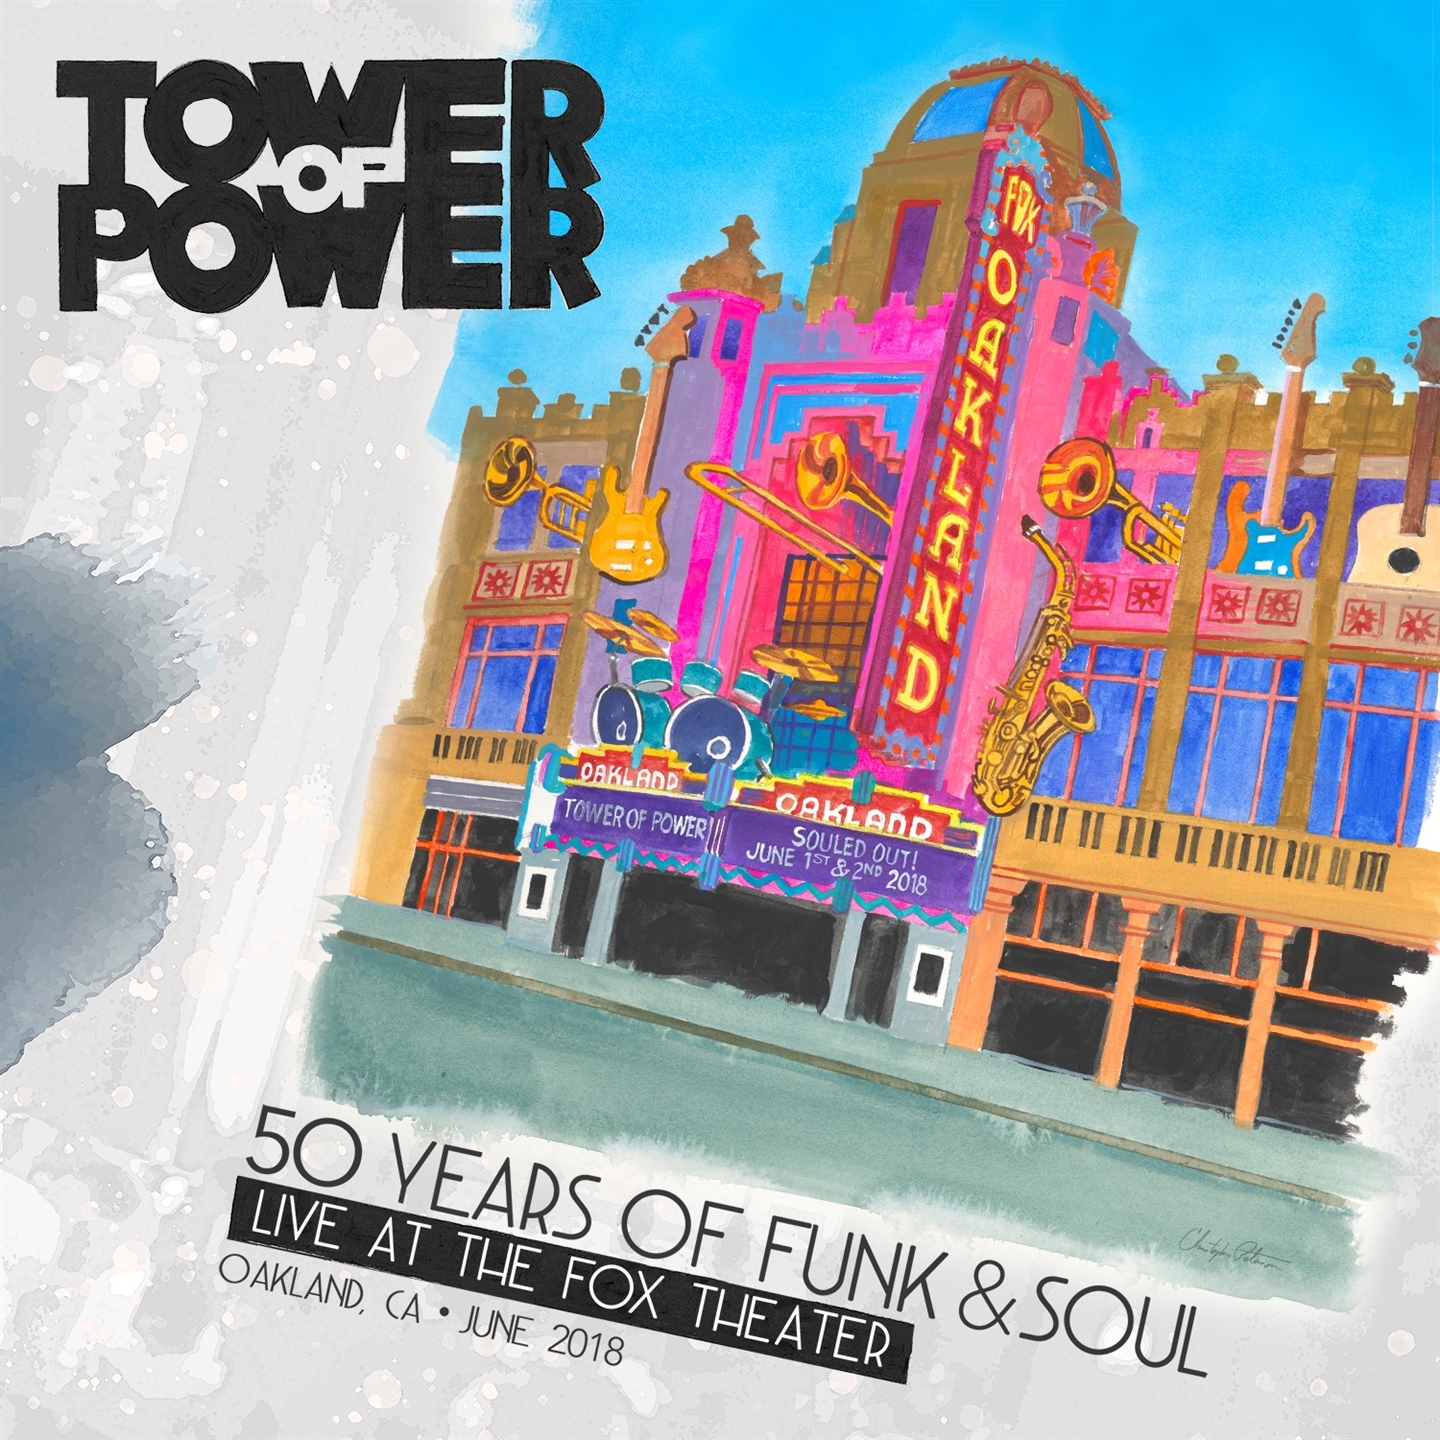 50 YEARS OF FUNK & SOUL: LIVE AT THE FOX THEATER [DVD]